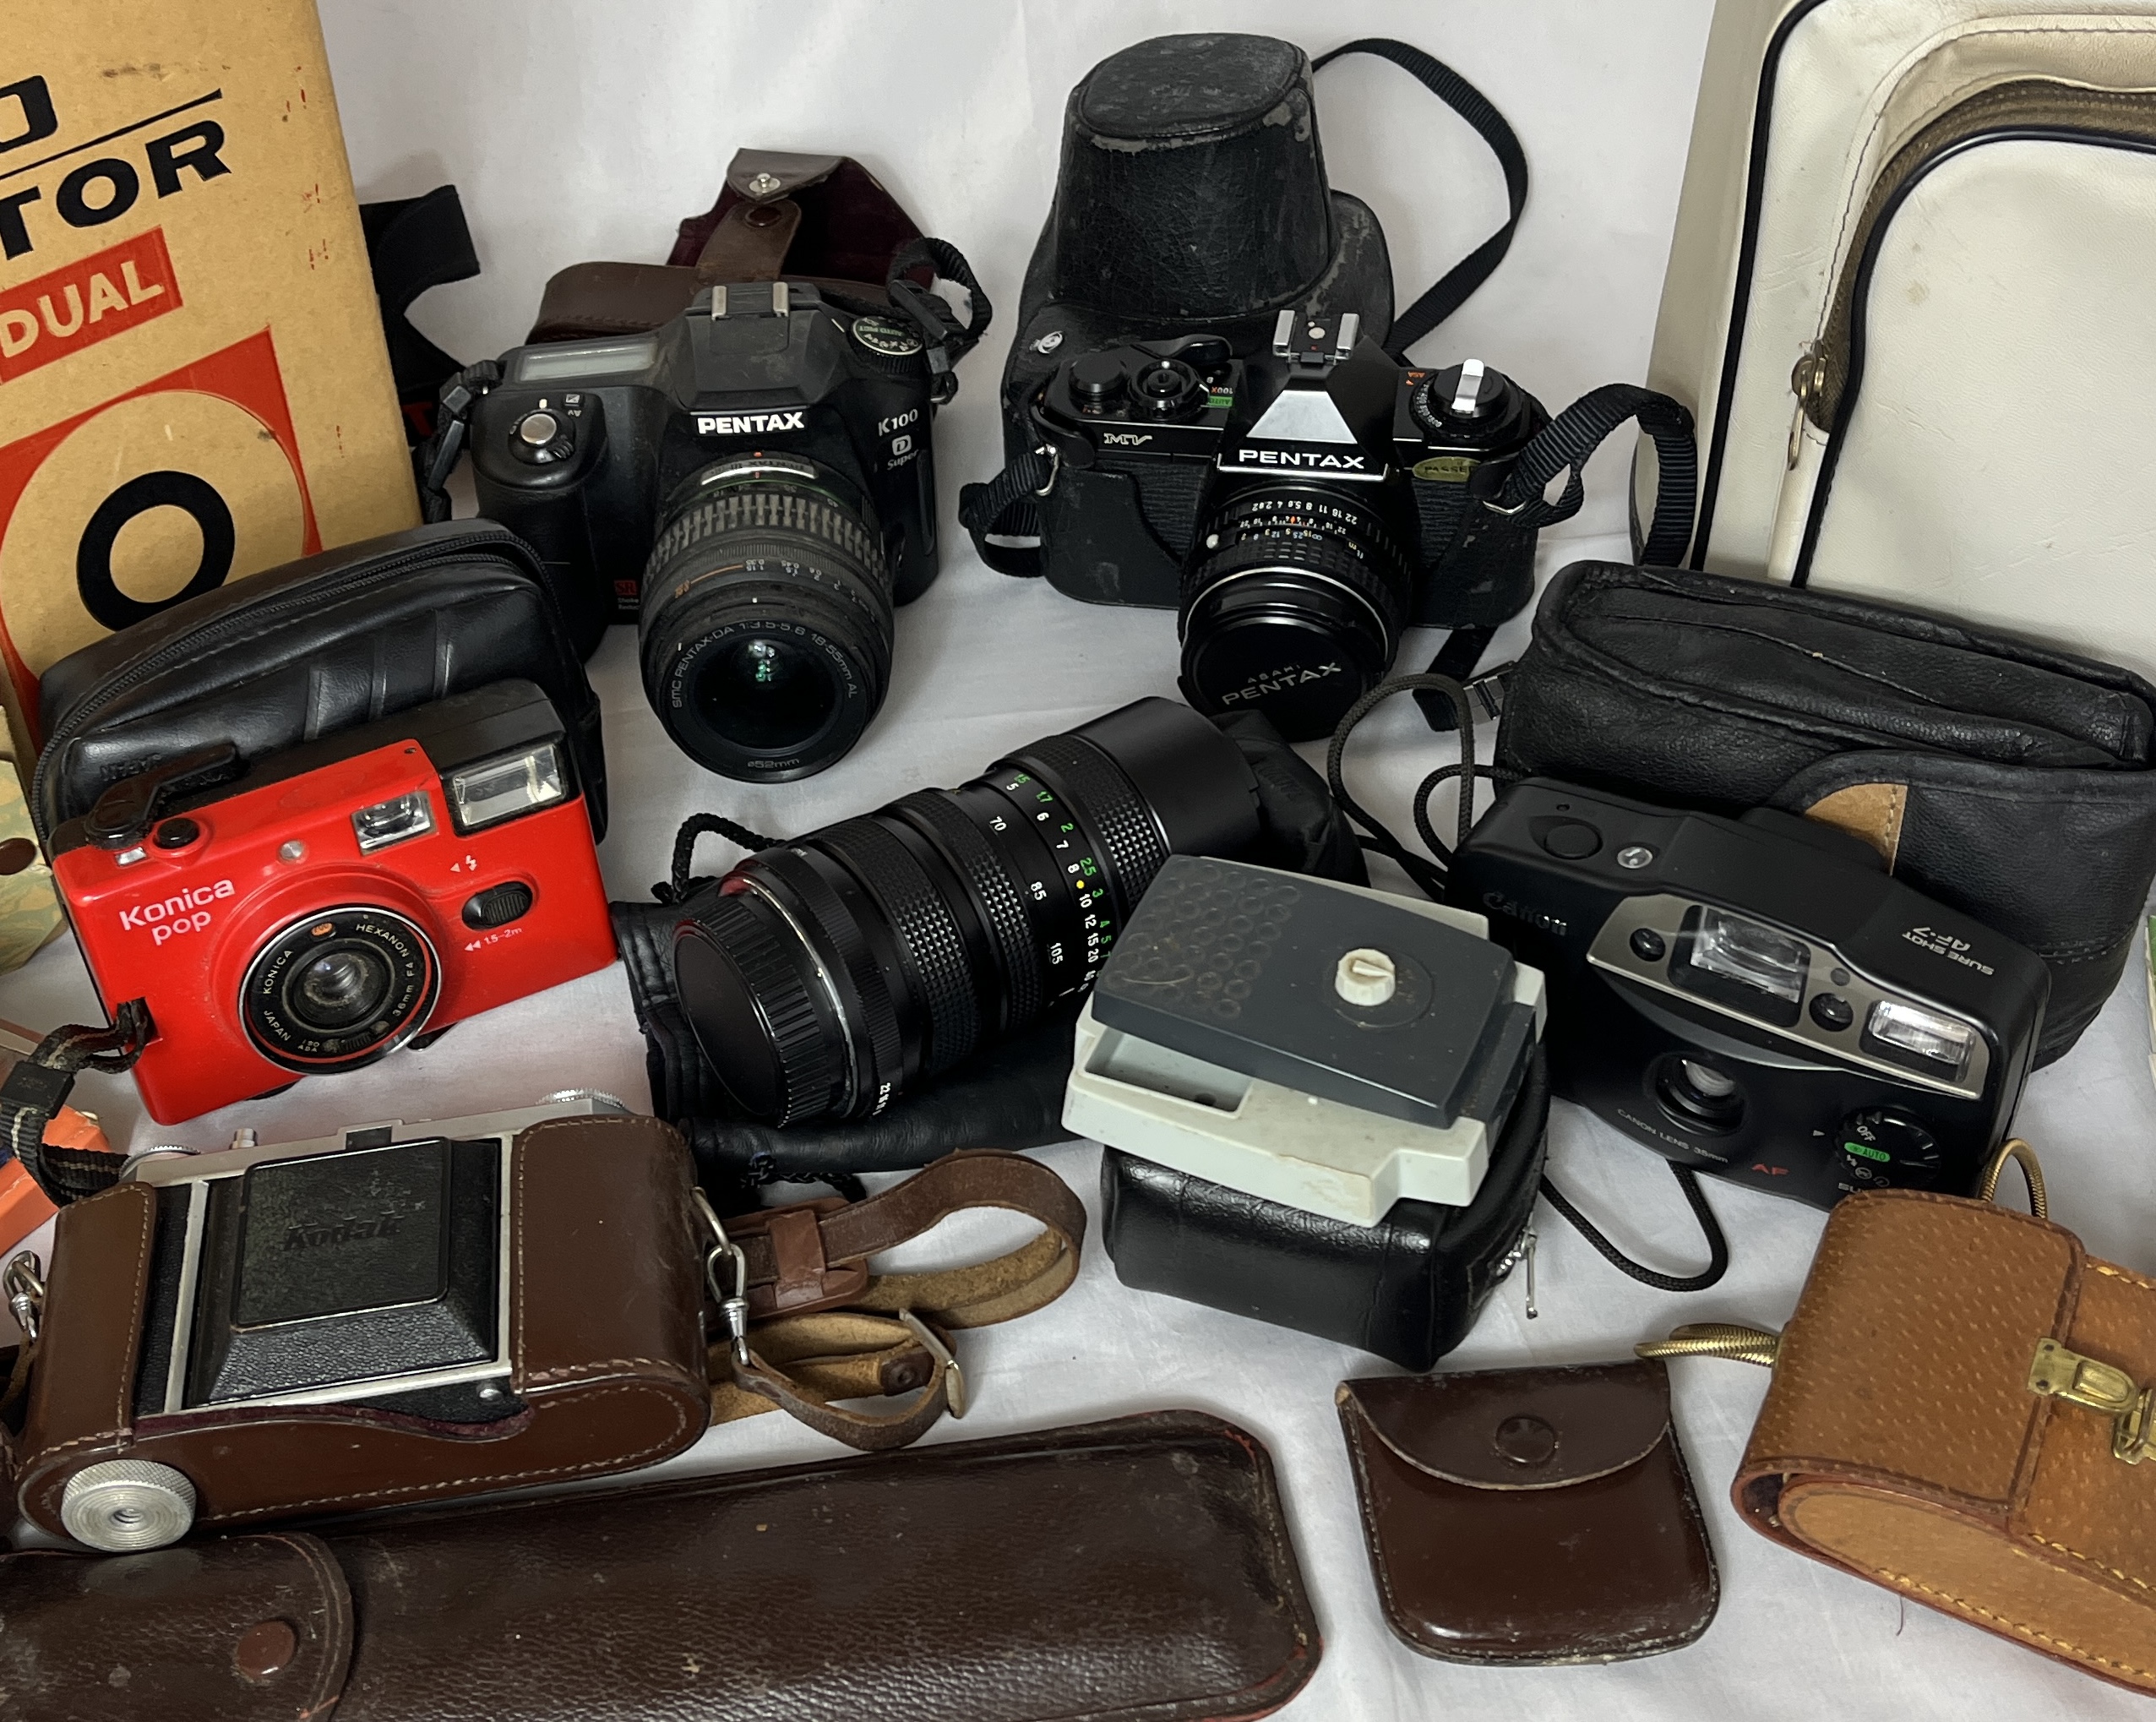 A collection of vintage cameras and camera equipment including Konica Pop, Pentax, Eumig etc. - Image 4 of 4